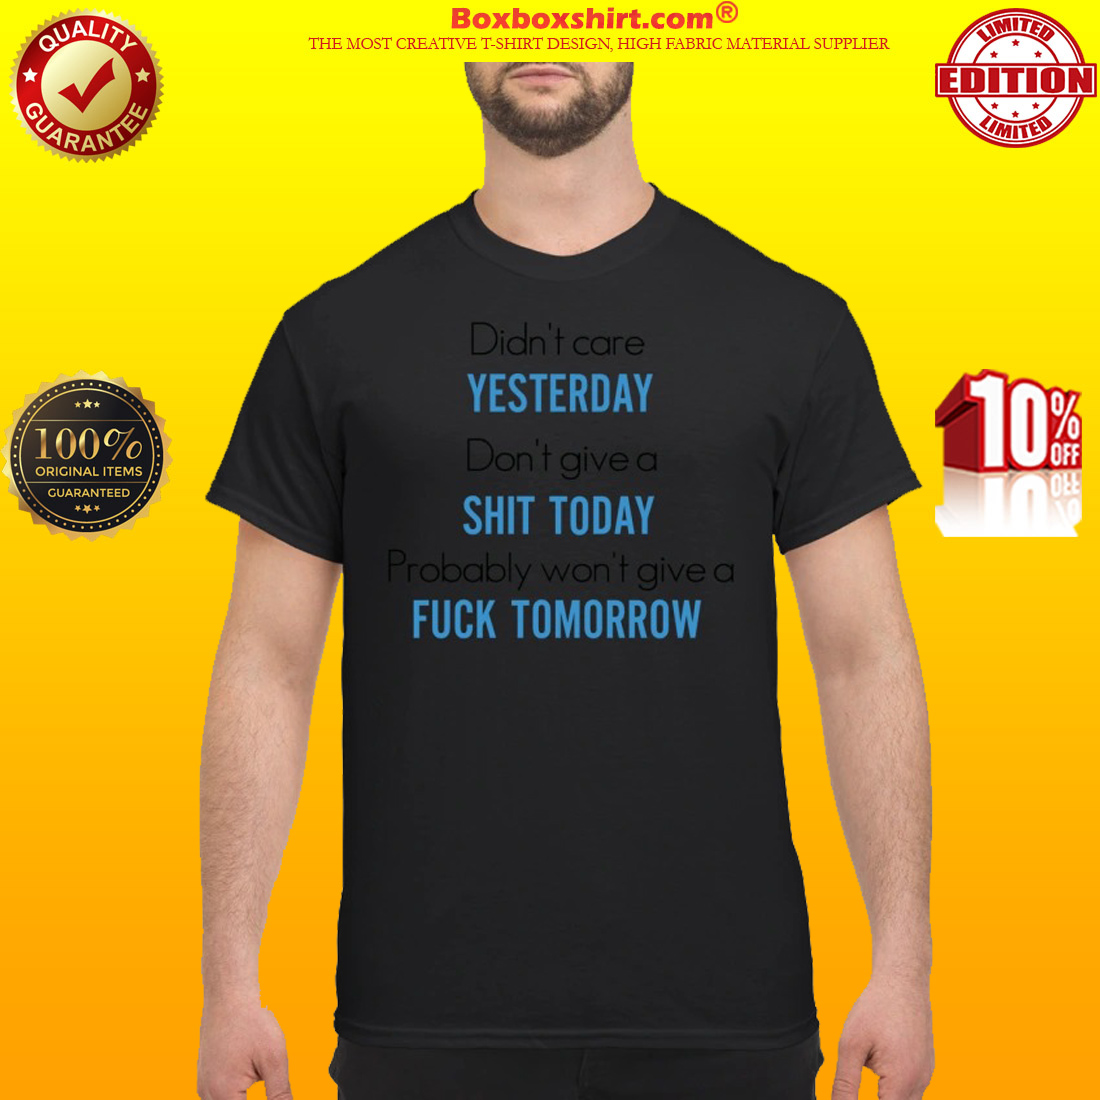 Didn't care yesterday don't give a shit today won't give a fuck tomorrow shirt